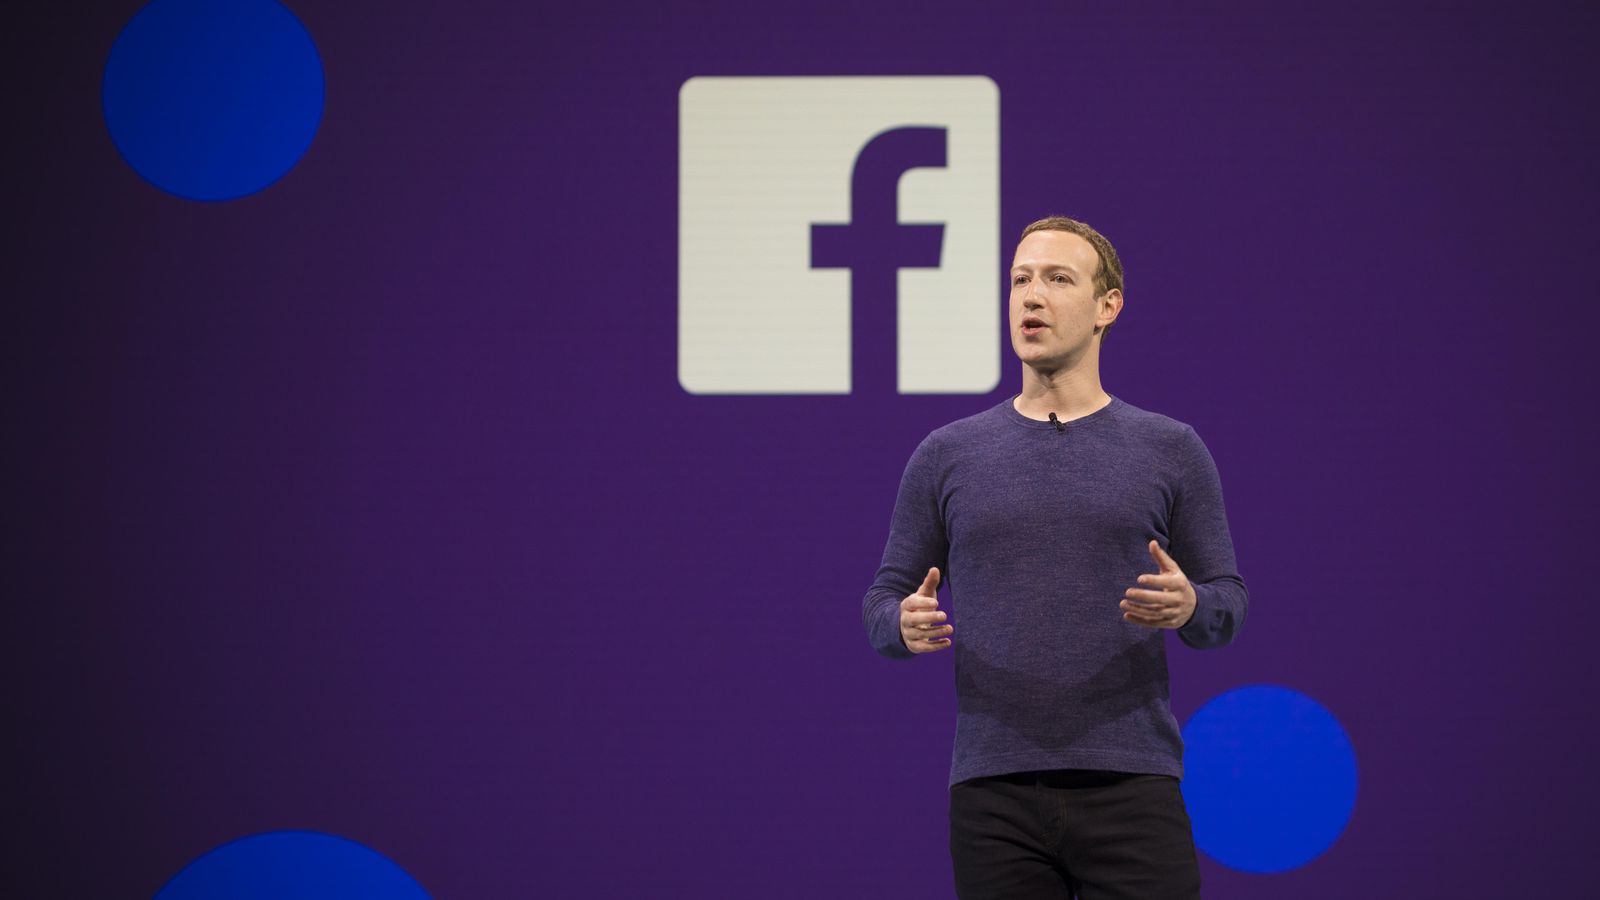 Mark Zuckerberg speaking at the Facebook F8 Conference 2018